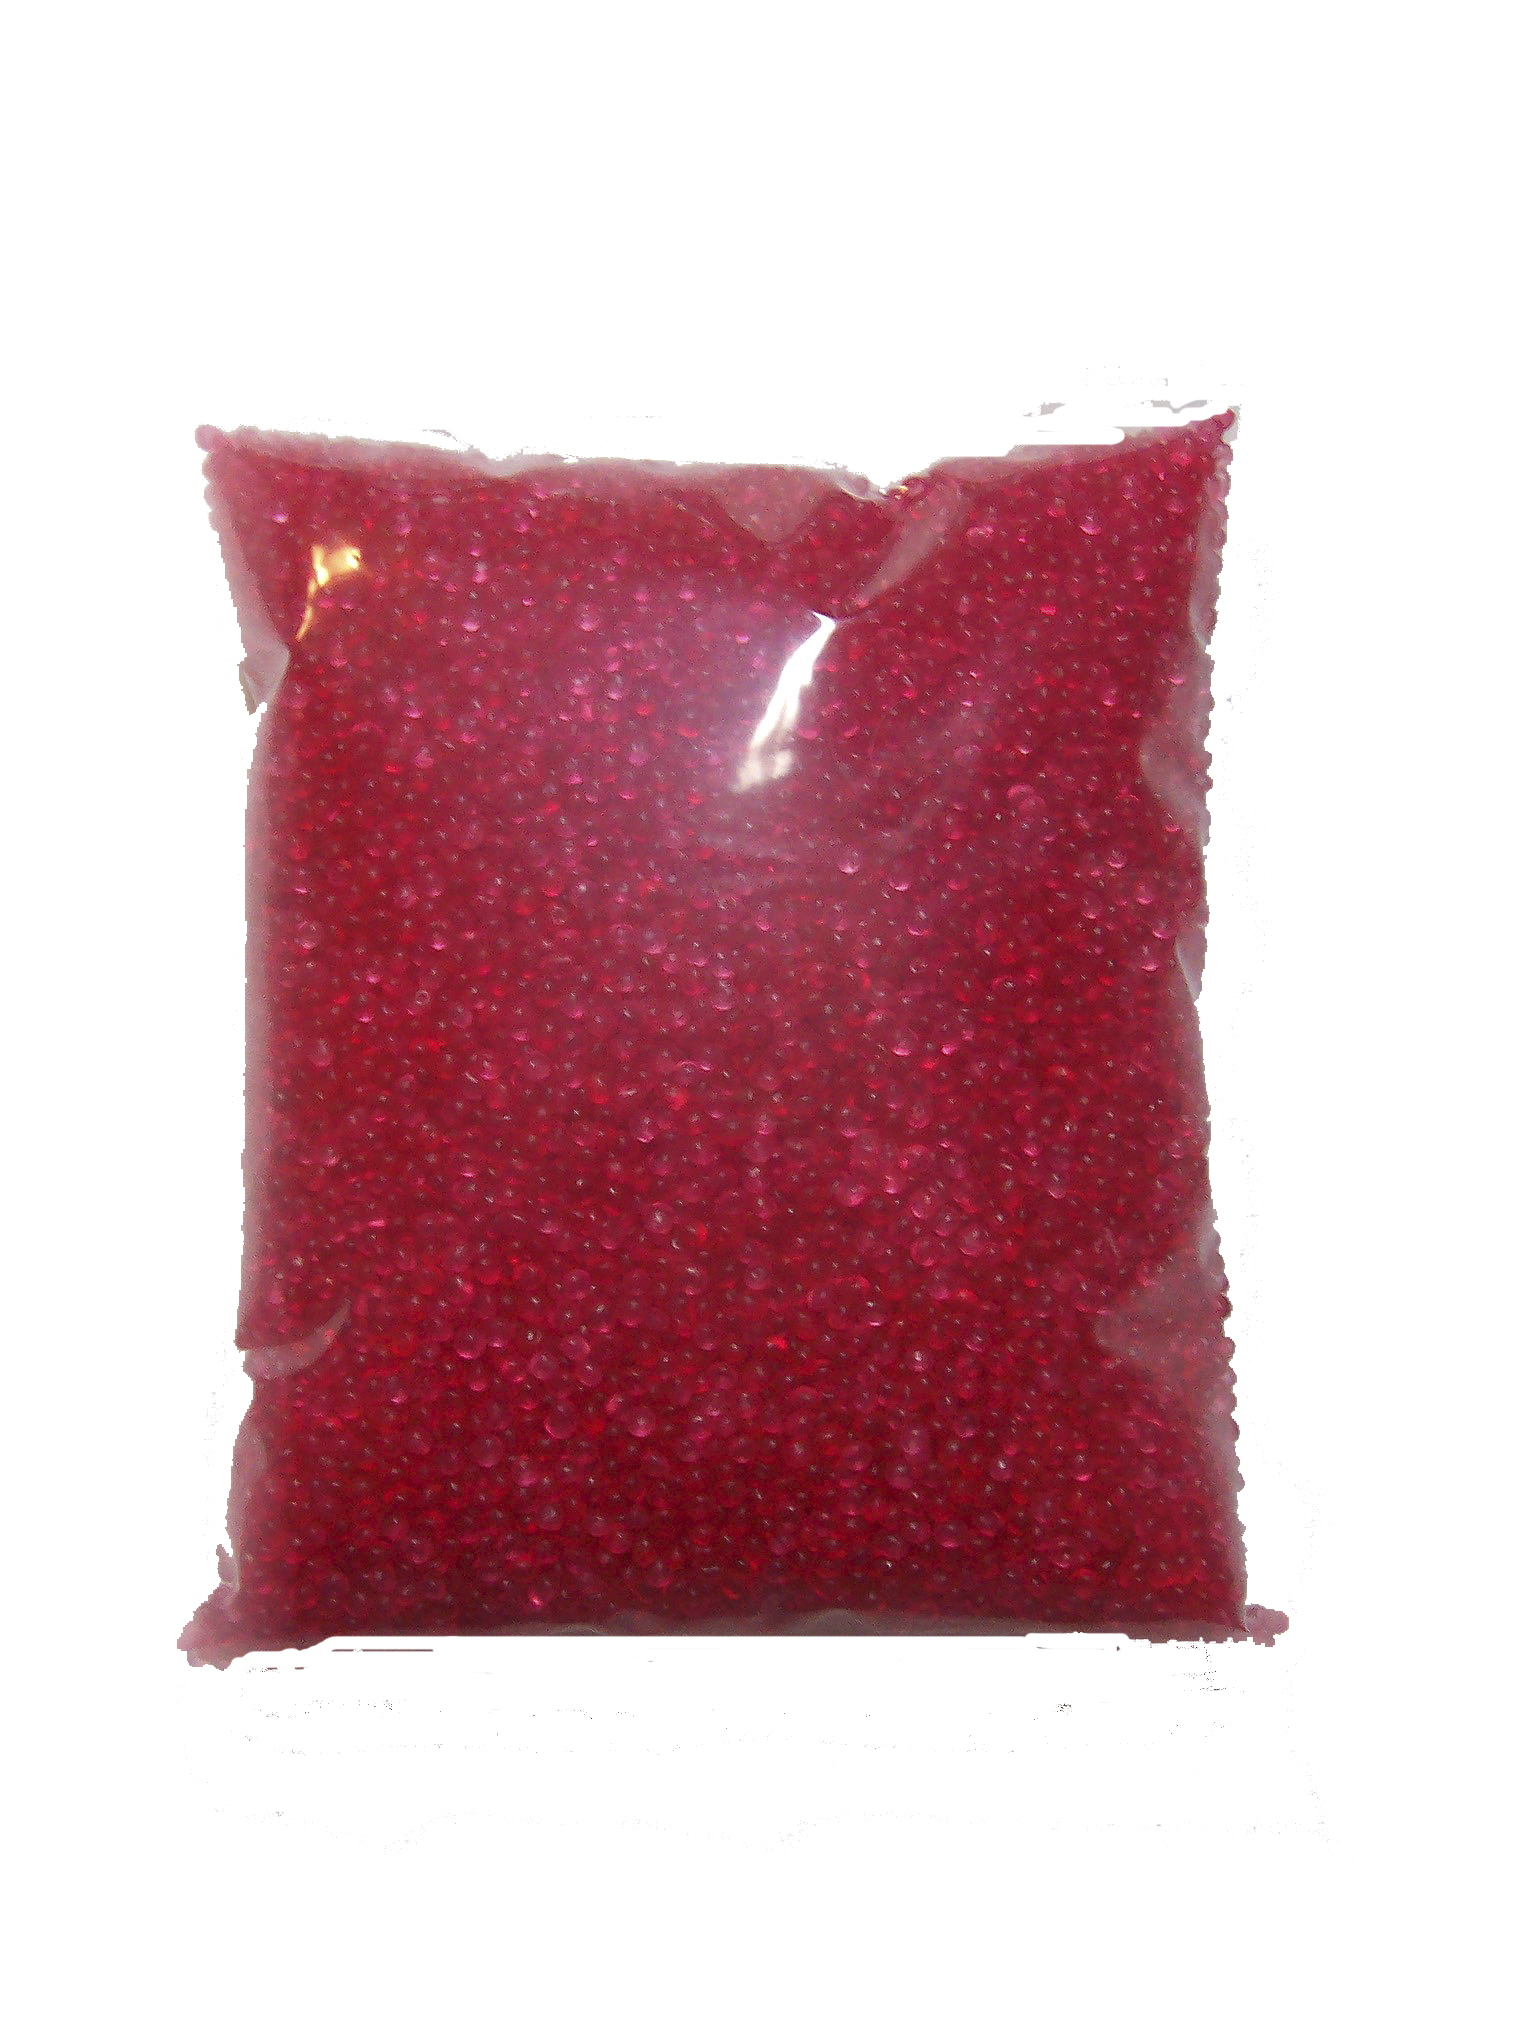 Scented Aroma Beads 1lb. (Scents: Black Ice)